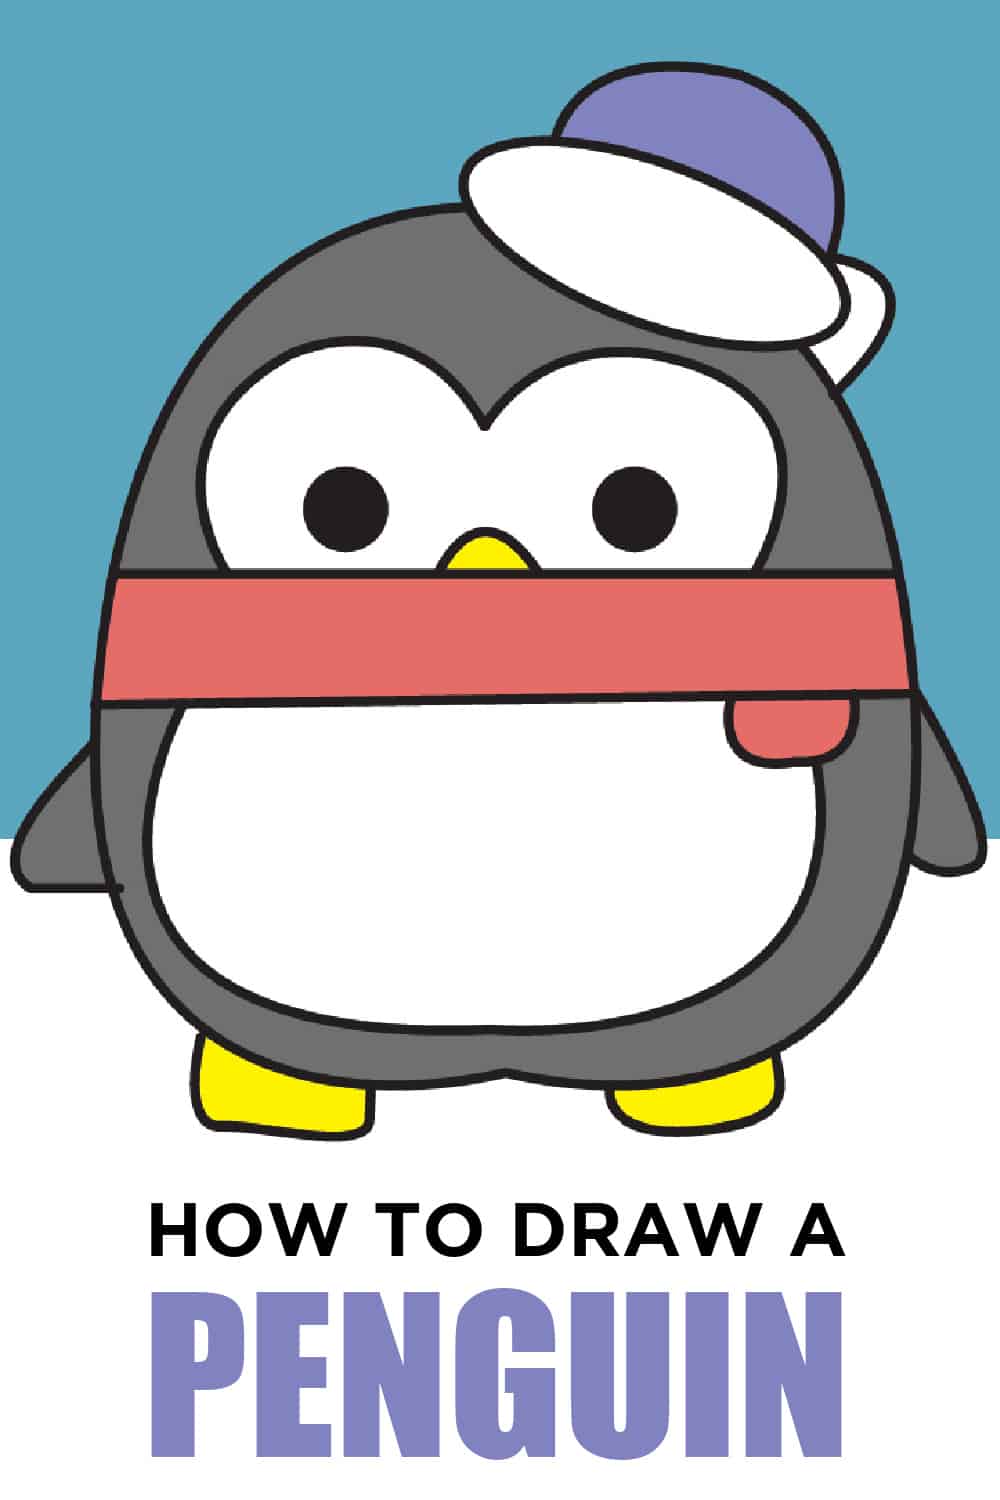 101 Drawing Ideas for Your Sketchbook